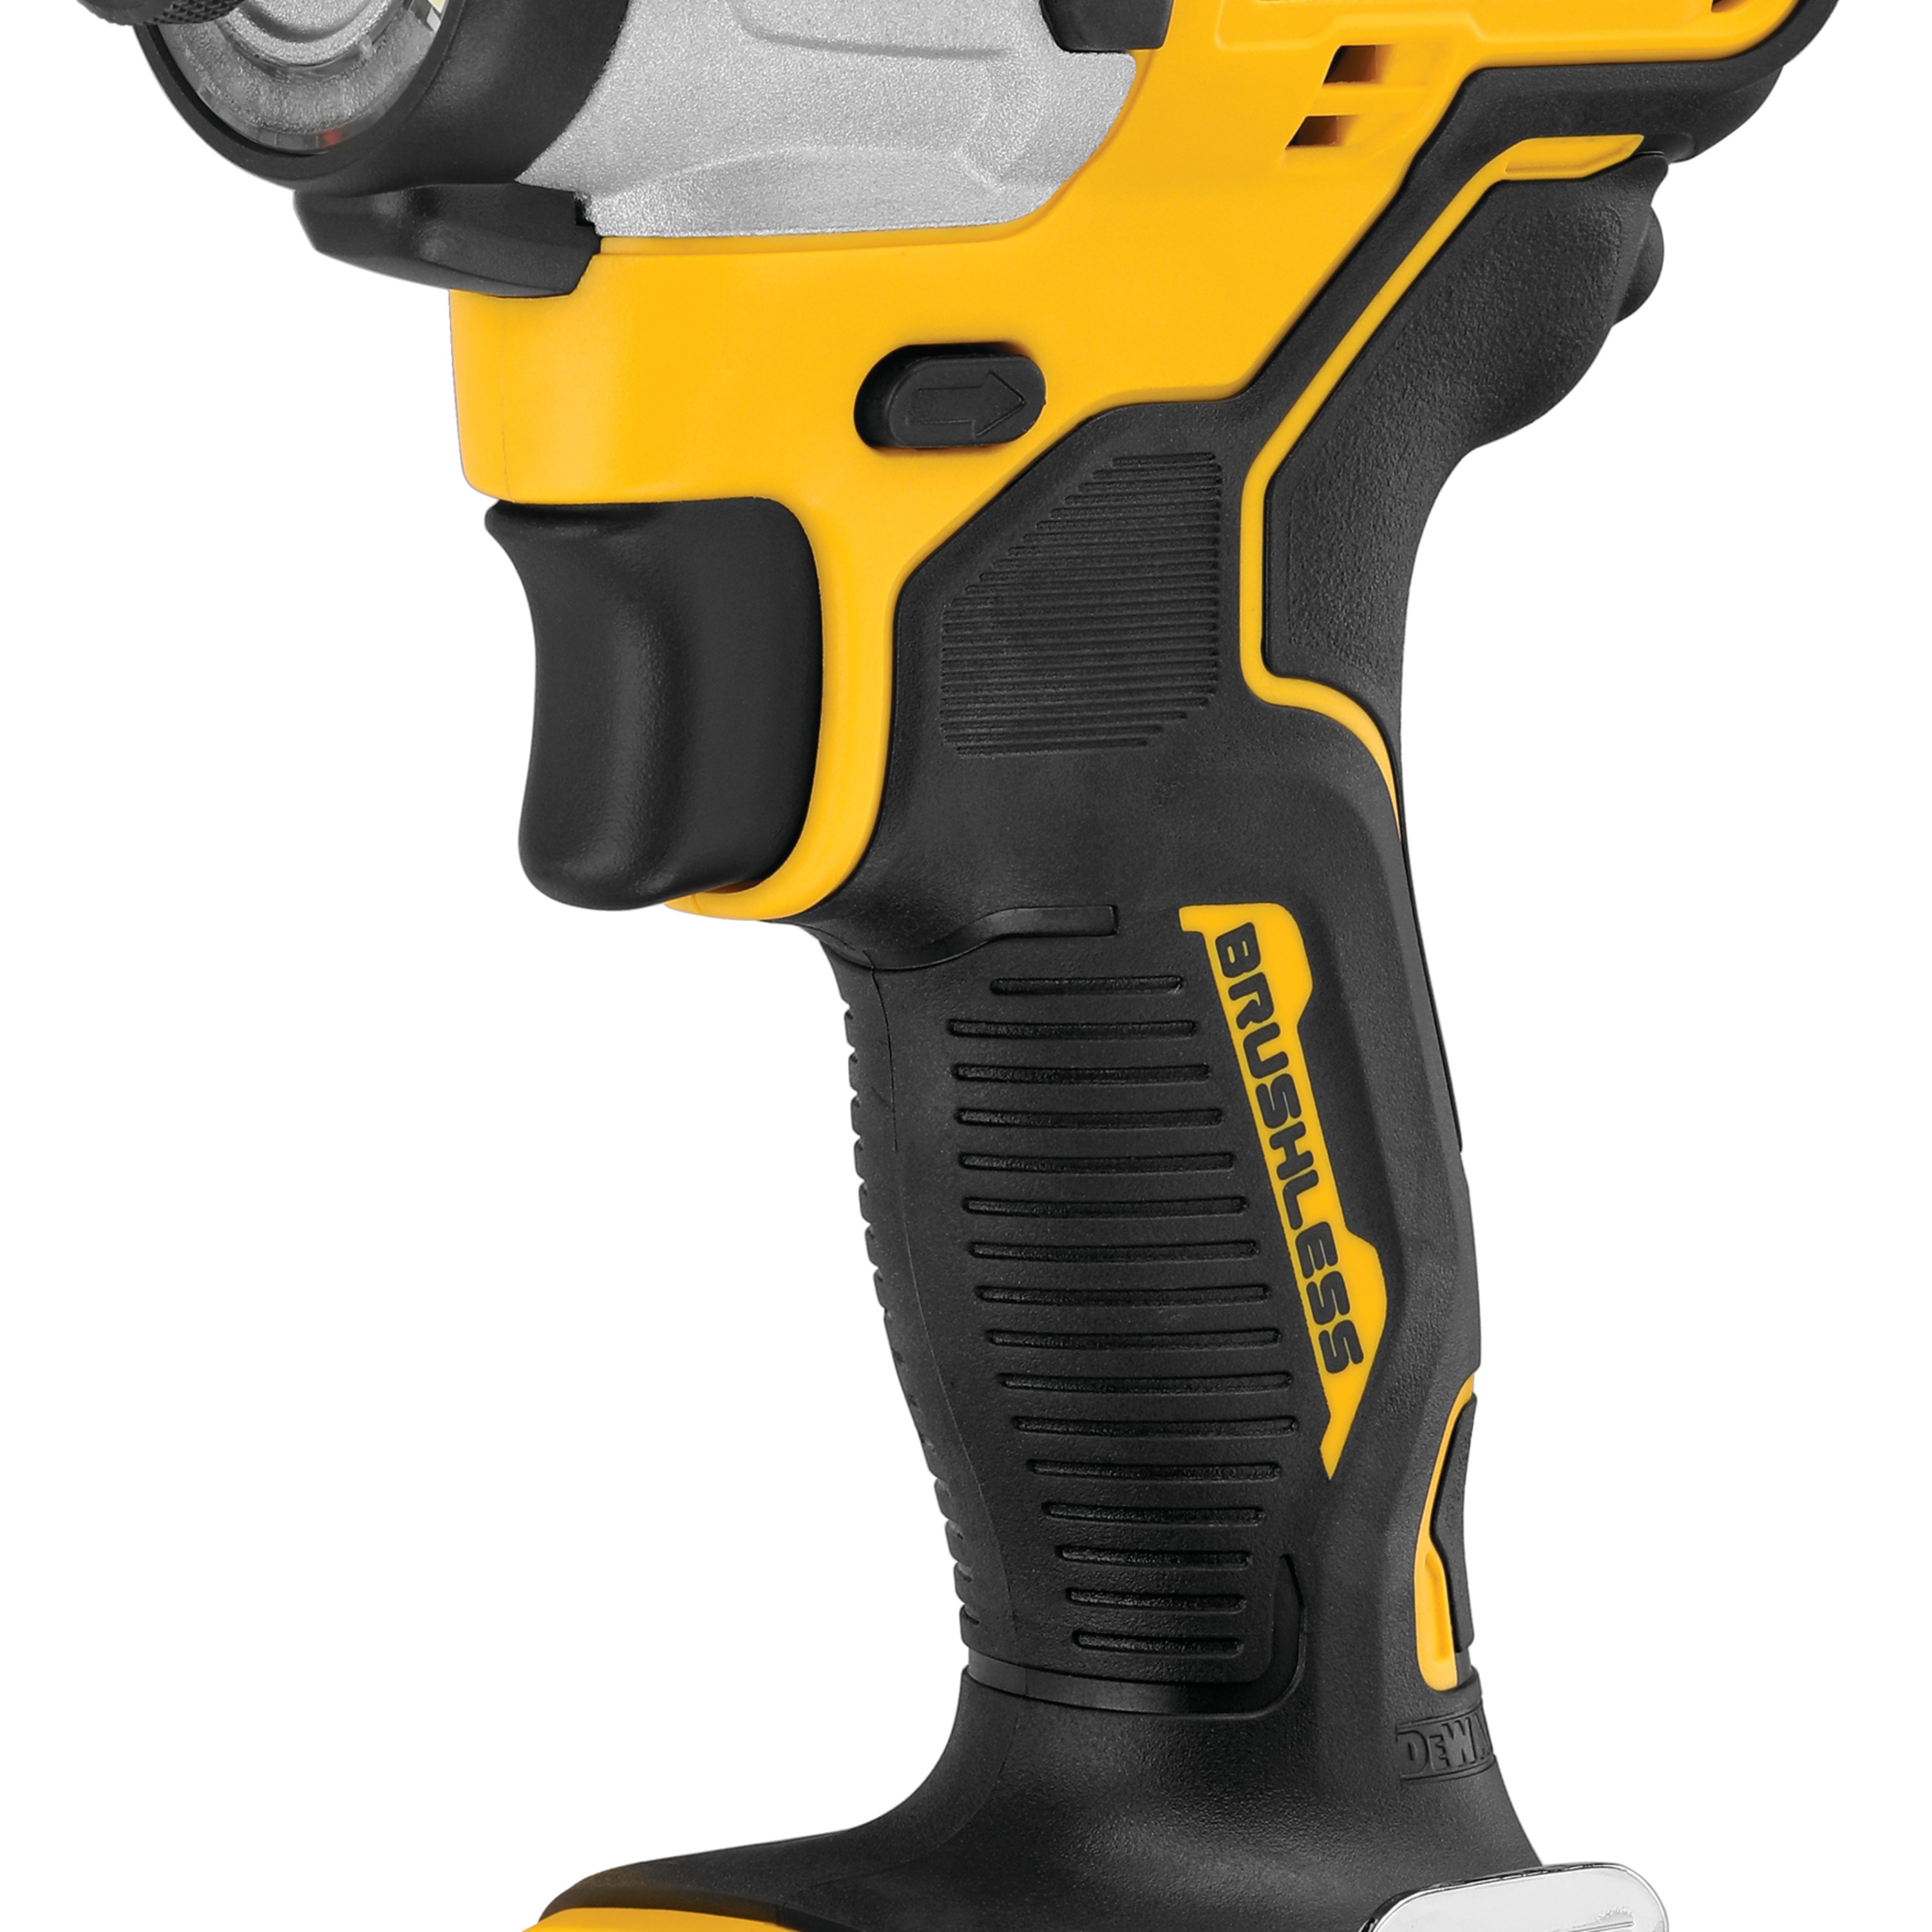 voor eeuwig Overgang lucht XTREME™ 12V MAX* Brushless 1/4 in. Cordless Impact Driver (Tool only) -  DCF801B | DEWALT